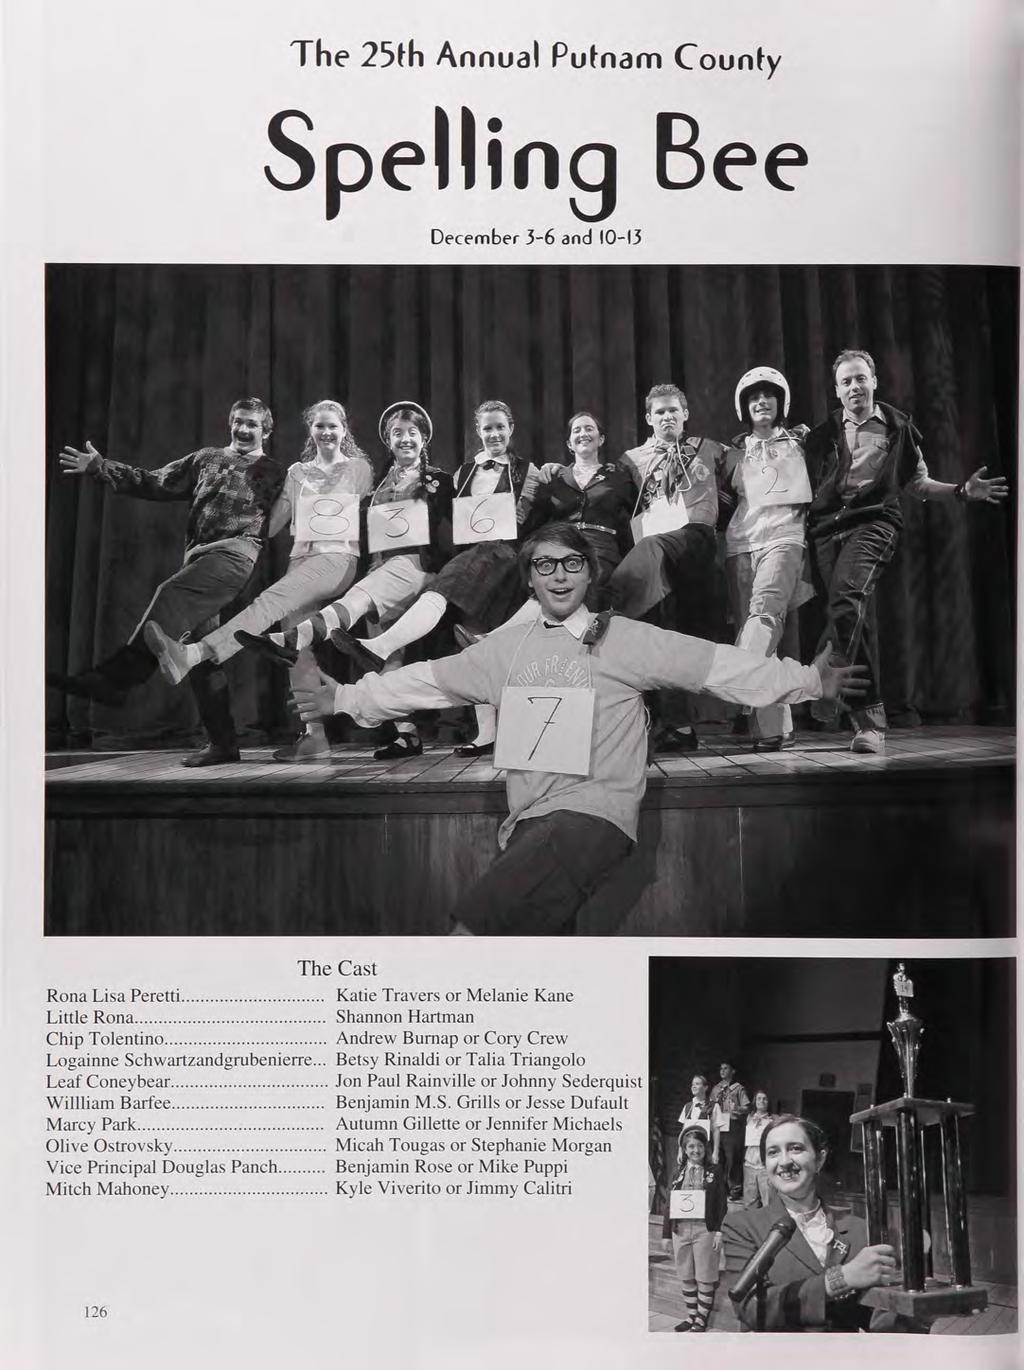 The 25fh Annual Putnam County Spelling Bee December 3-6 and 10-13 The Cast Rona Lisa Peretti Katie Travers or Melanie Kane Little Rona Shannon Hartman Chip Tolentino Andrew Bumap or Cory Crew